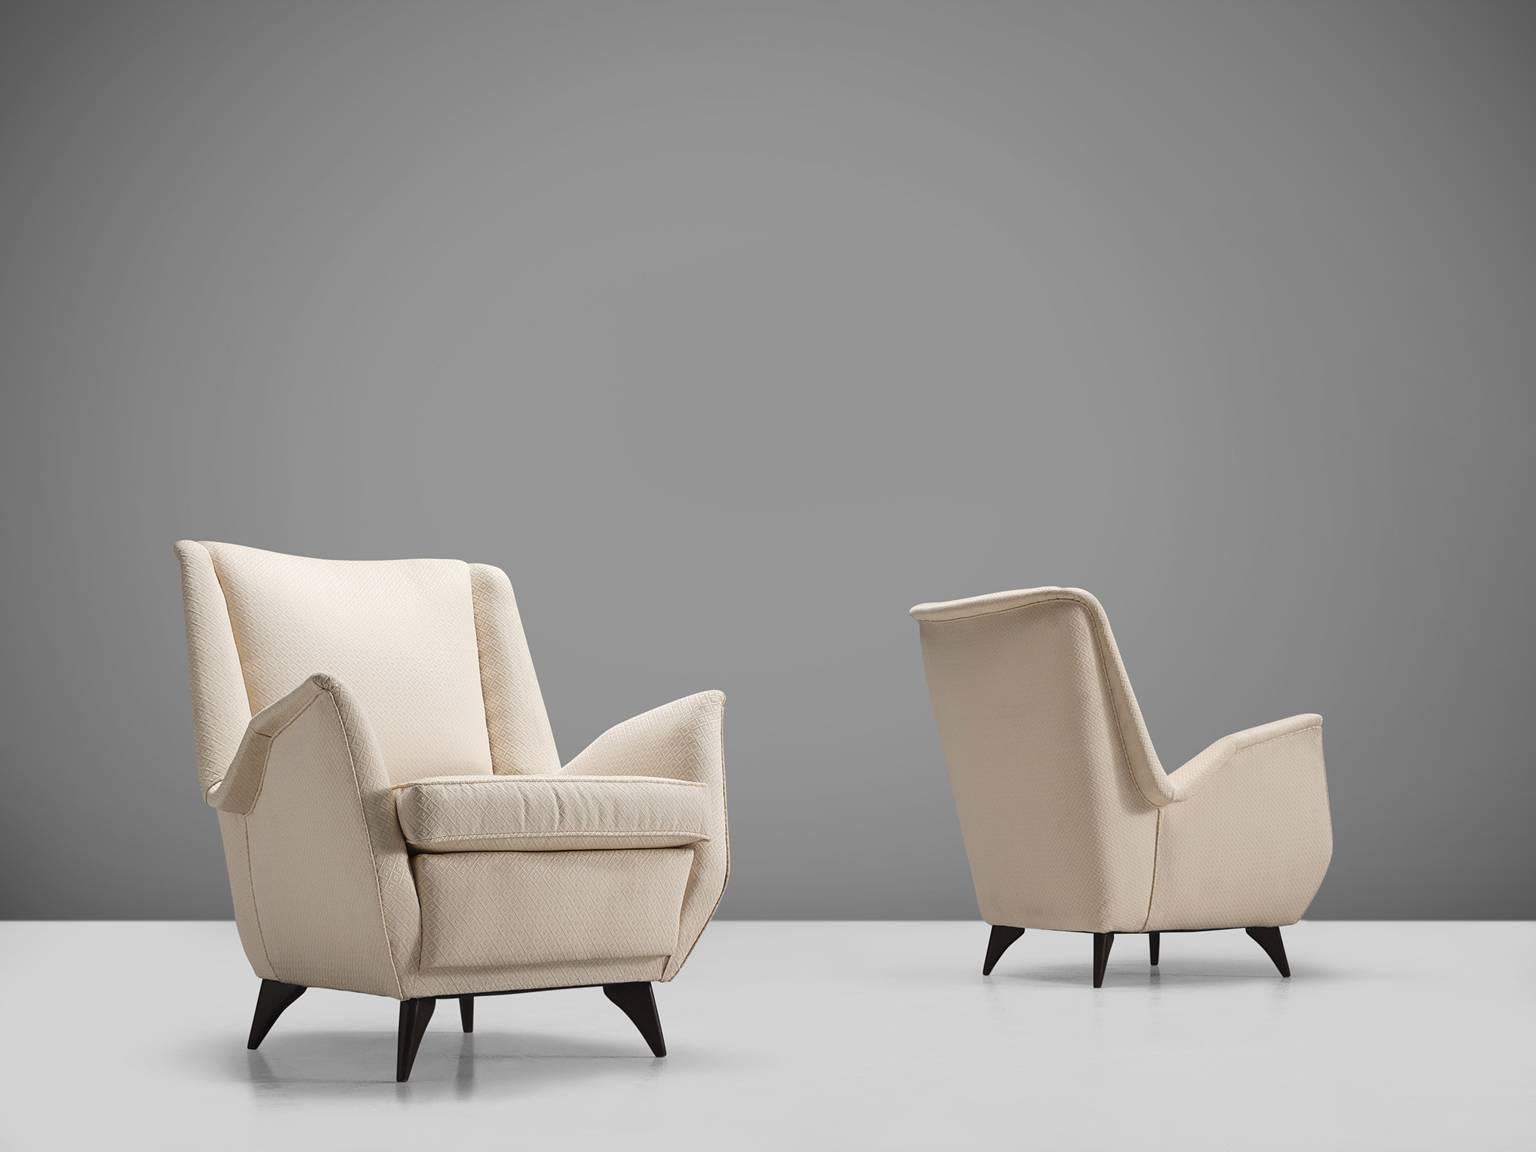 ISA, pair of lounge chairs, in white fabric and wood, Italy, 1950s. 

An elegant pair of Italian Lounge chairs in the manner of Gio Ponti. What really characterizes this chairs is their theatrical, fluent armrests and medium high back in